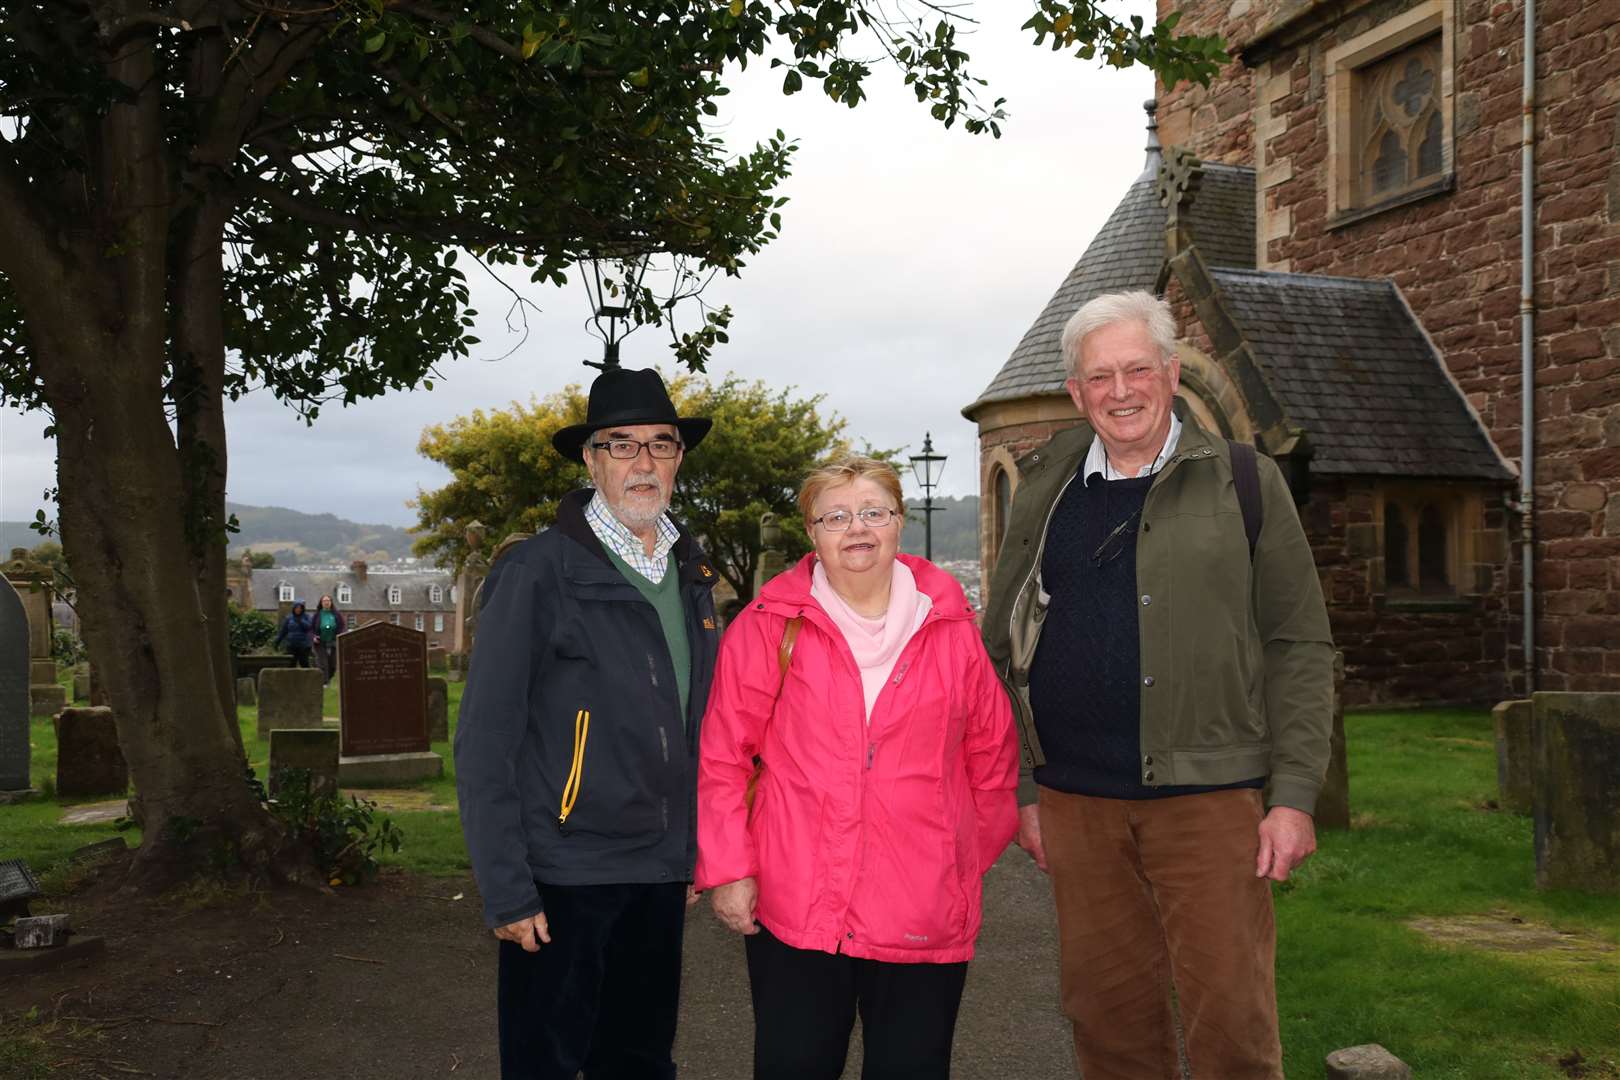 Friends of the Old High steering group members Thomas Prag, Jean Slater (chairperson) and Chris Lewkcock